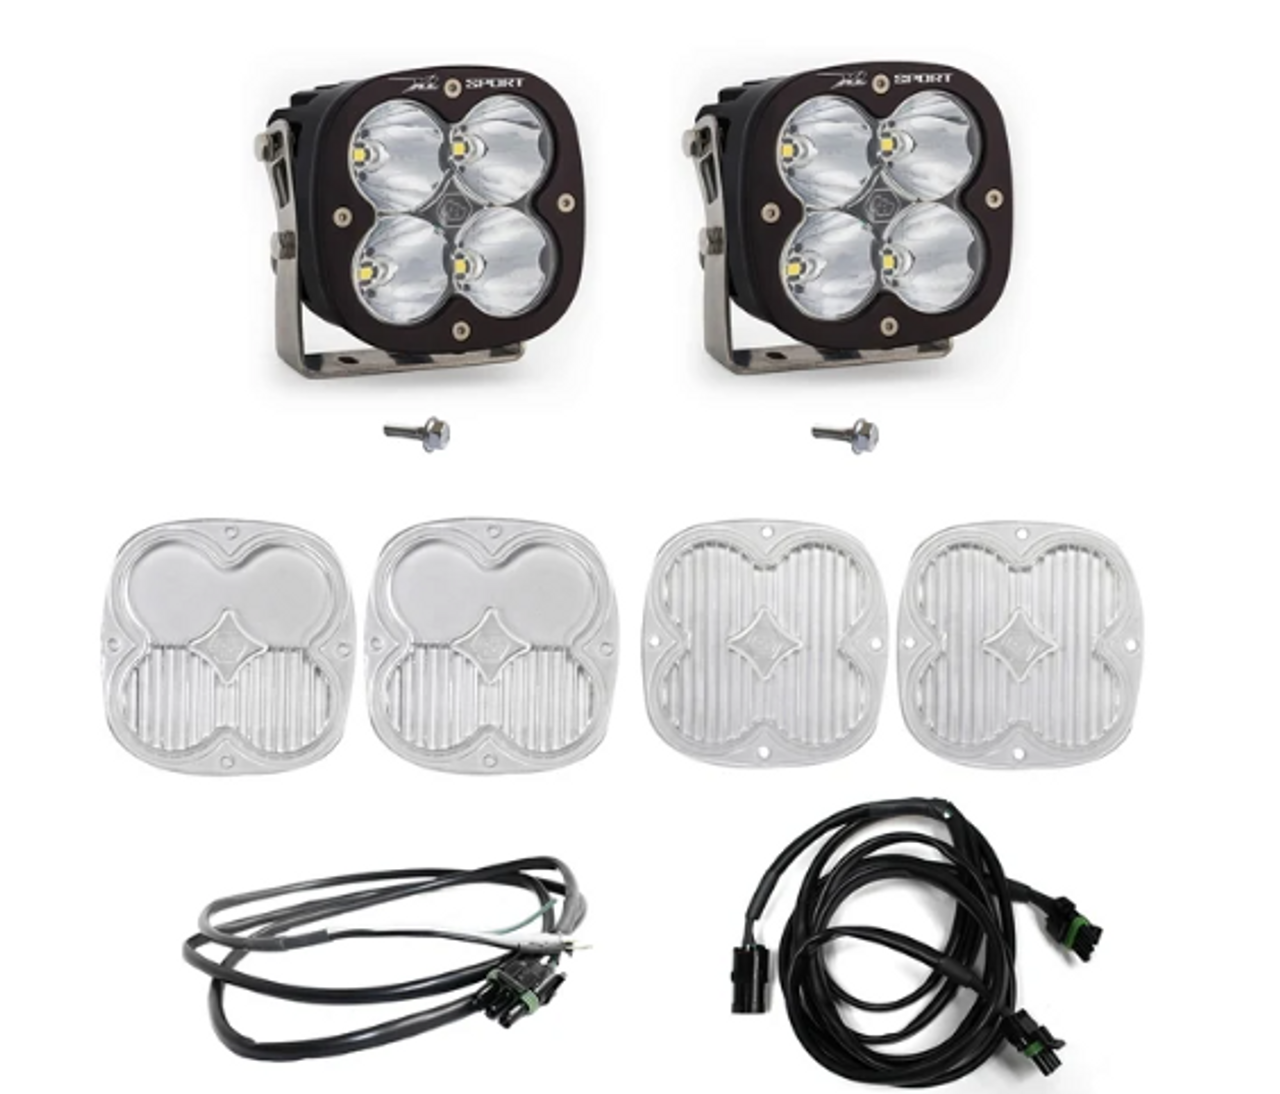 Baja Designs 447752UP XL Pro Series A-Pillar Light Kit with Upfitter for Ford Bronco 2021+